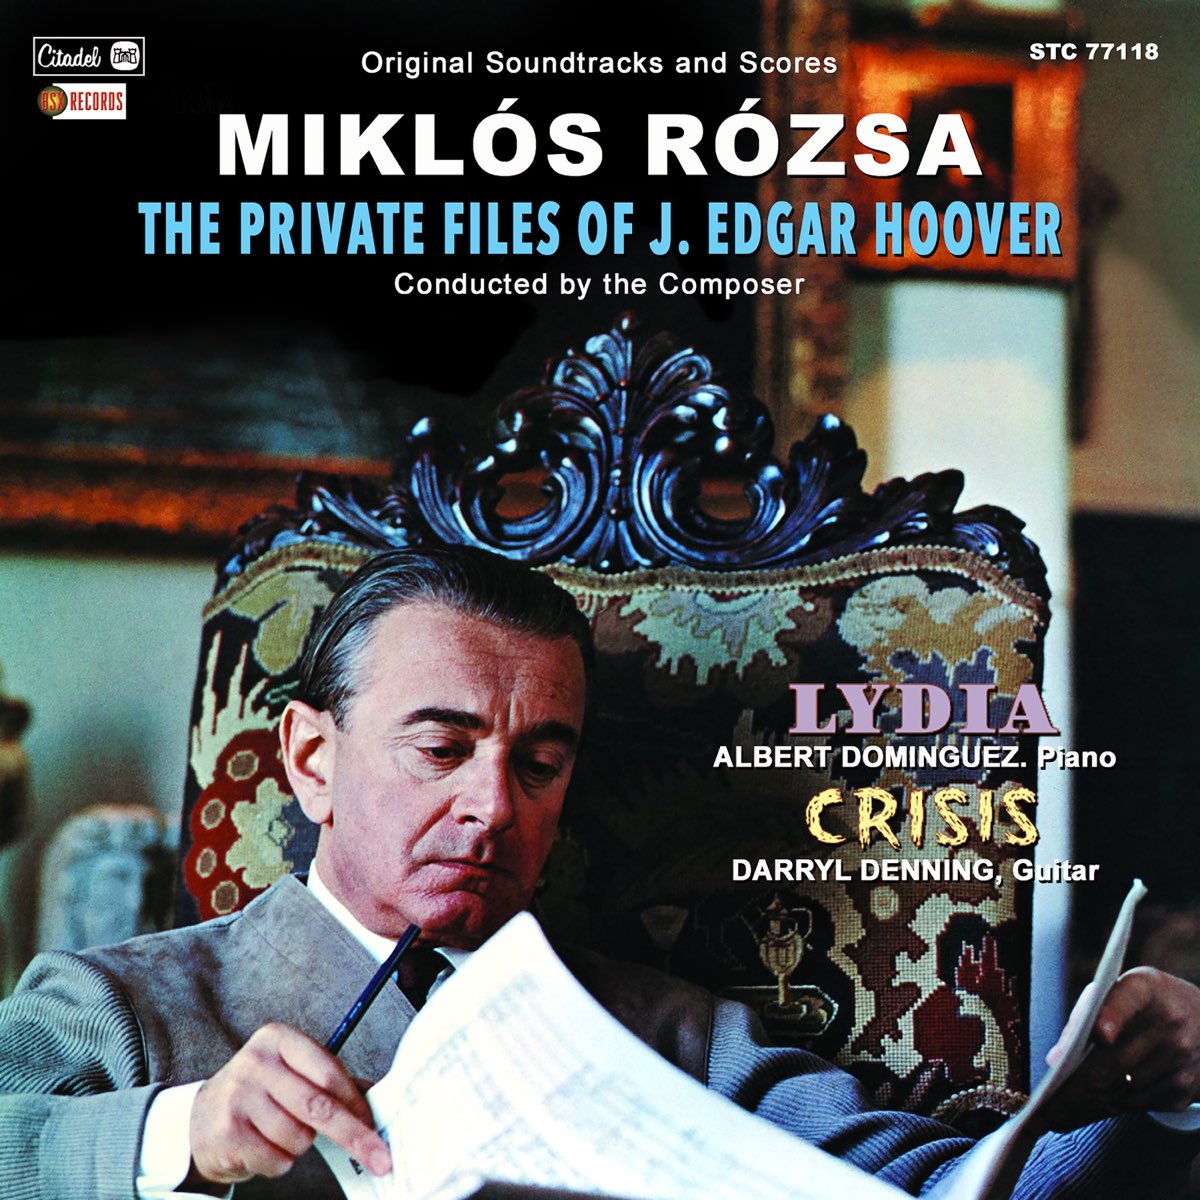 The Private Files of J. Edgar Hoover / Lydia / Crisis (Original Soundtracks  and Scores) by Miklós Rózsa on Apple Music